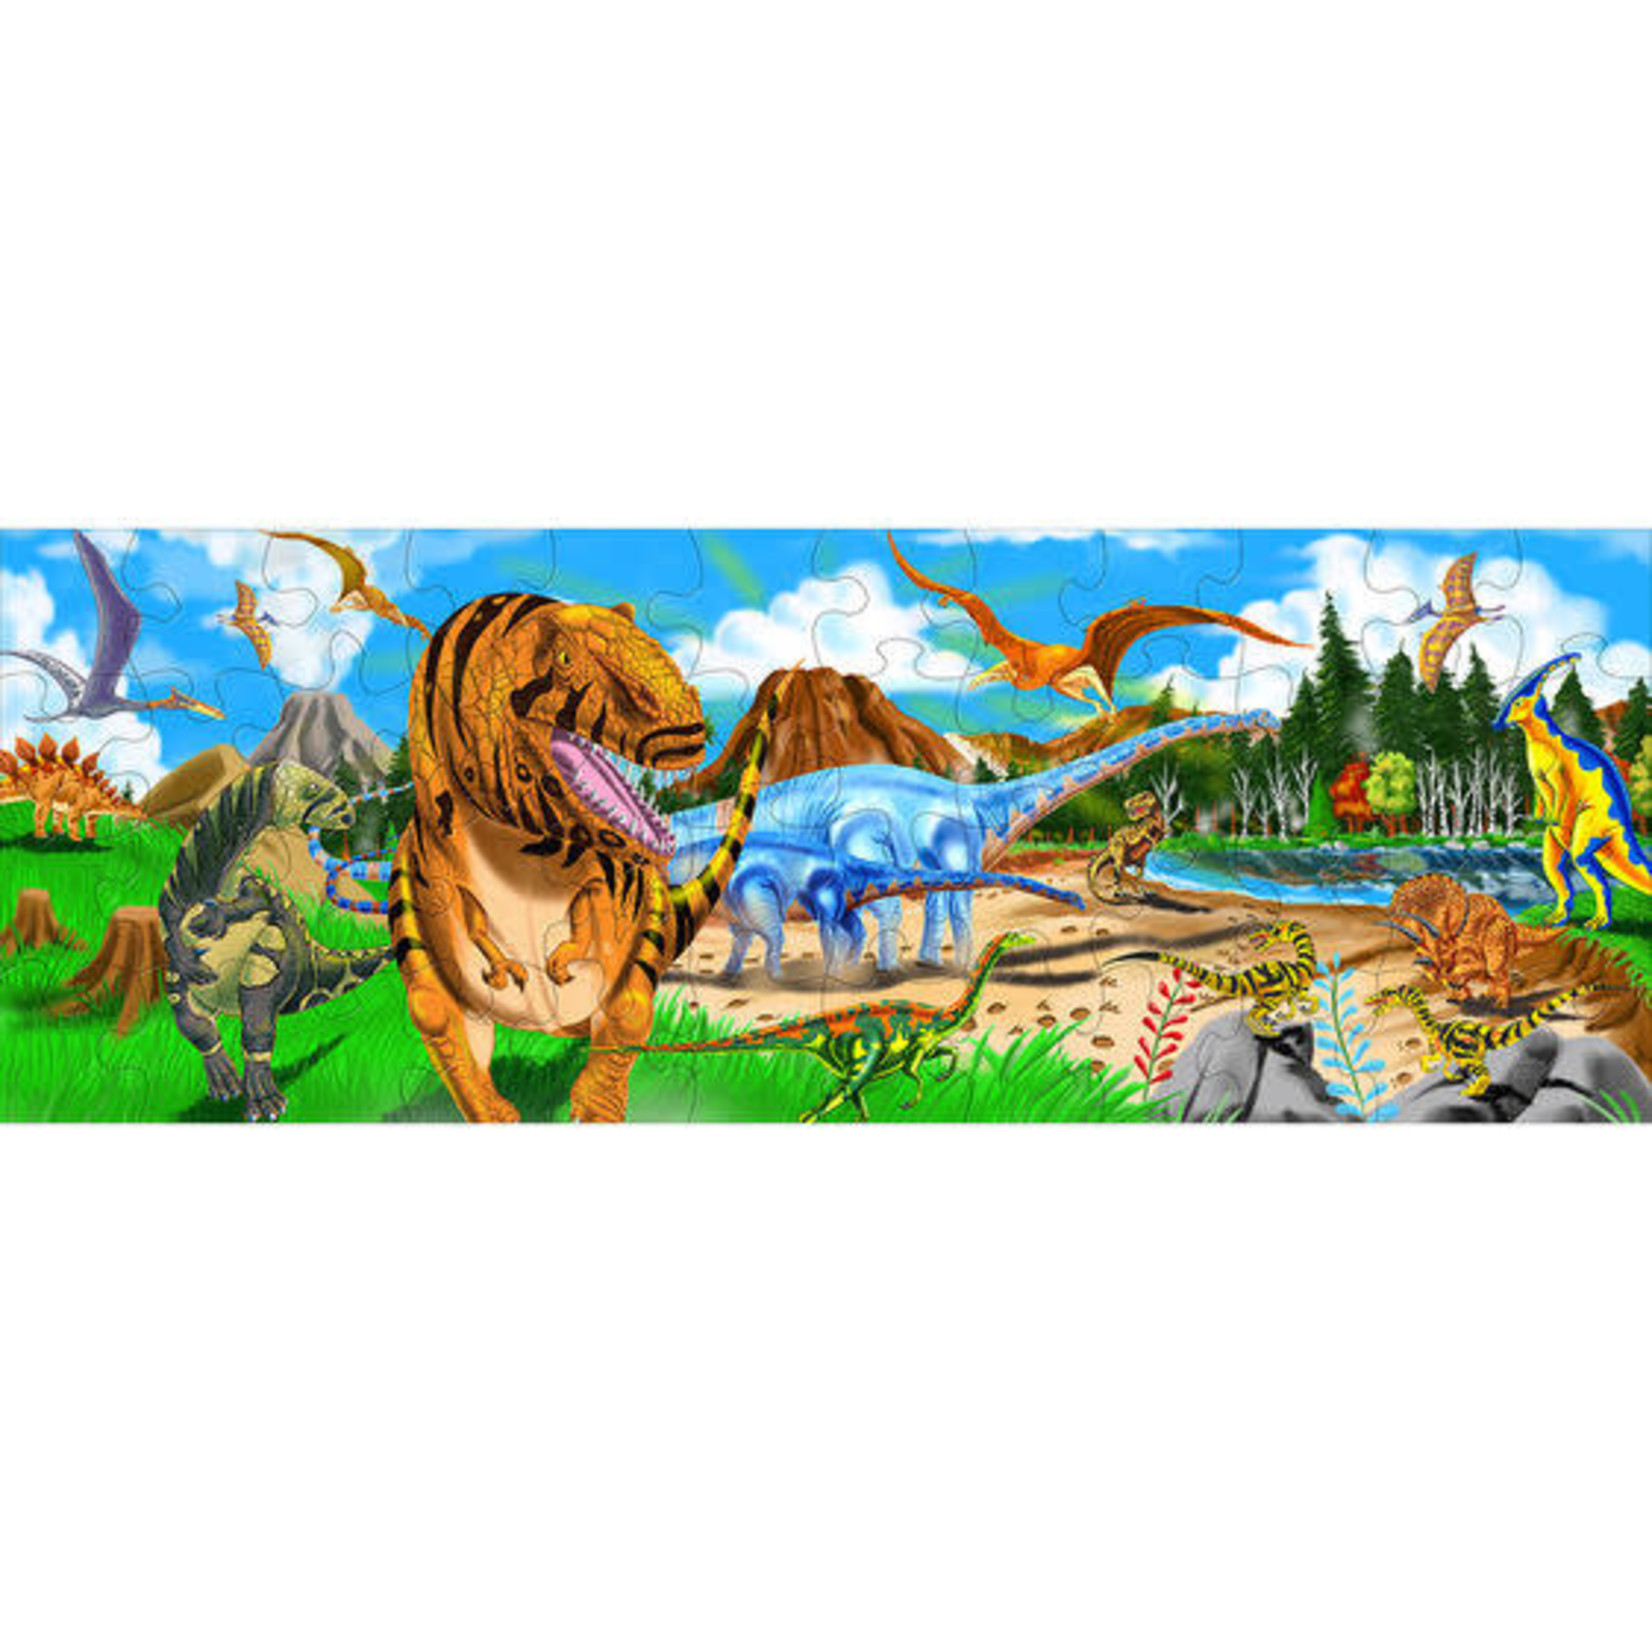 Melissa and Doug Land of Dinosaurs – 48-Piece Giant Floor Jigsaw Puzzle